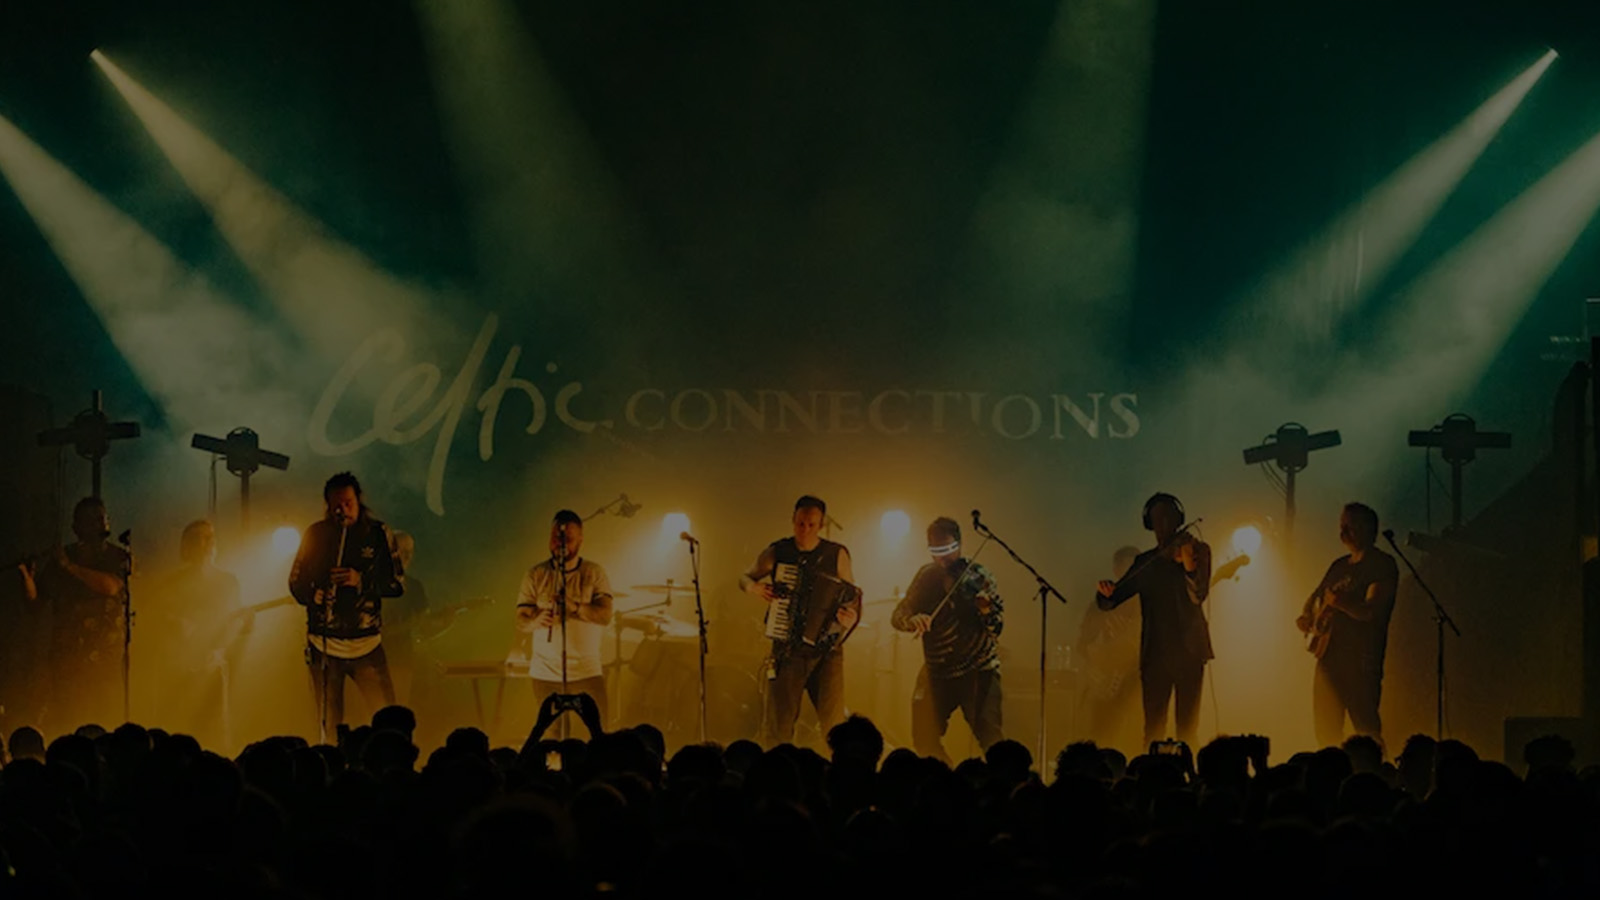 A band perform at Celtic Connections - the image is very atmospheric, with many musicians playing instruments vigorously on stage illuminated with yellow and green lights to a full audience while smoke rises through the air